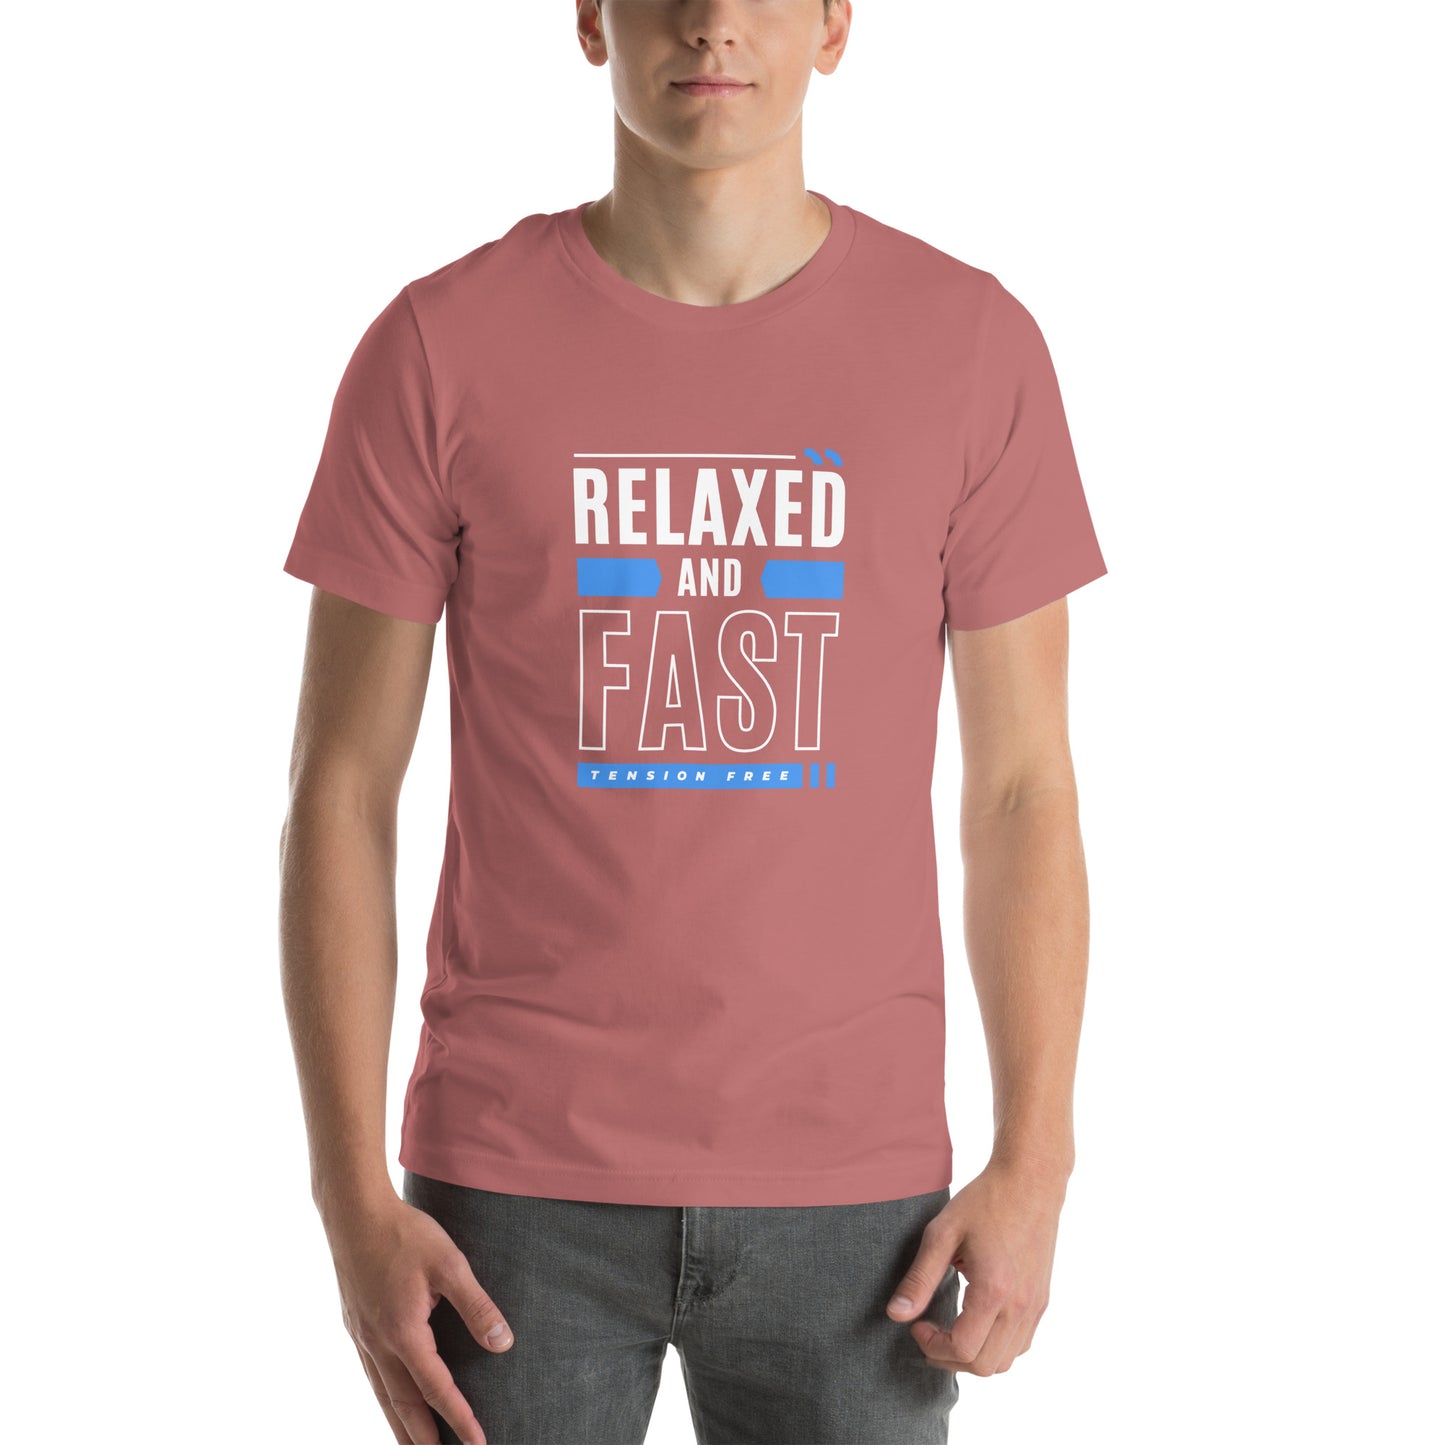 Relaxed and FAST! - Unisex T-Shirt